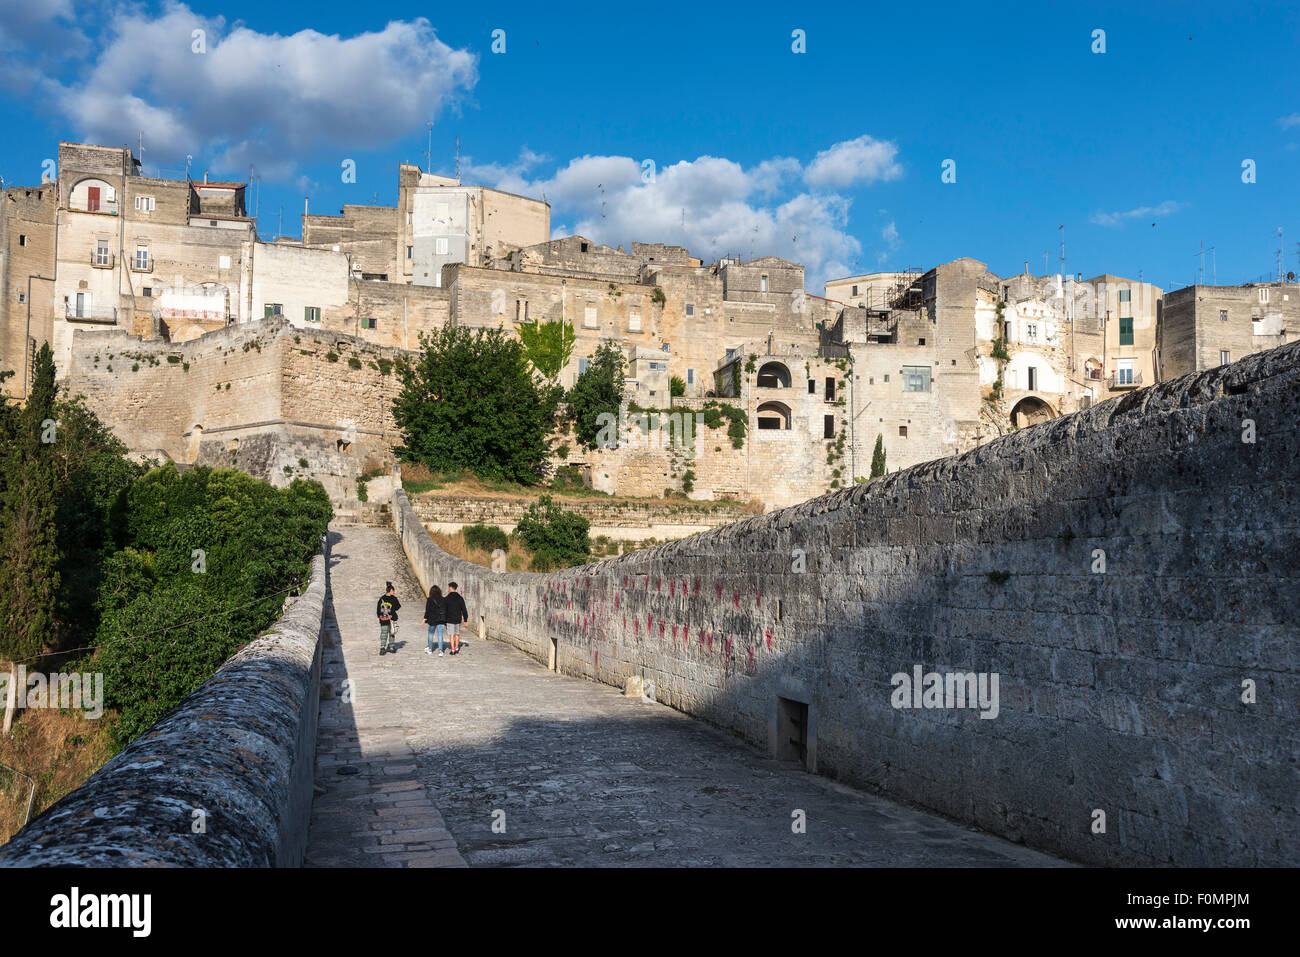 On the Roman bridge across the gorge at the town of Gravina in Puglia, Puglia, Southern Italy. Stock Photo